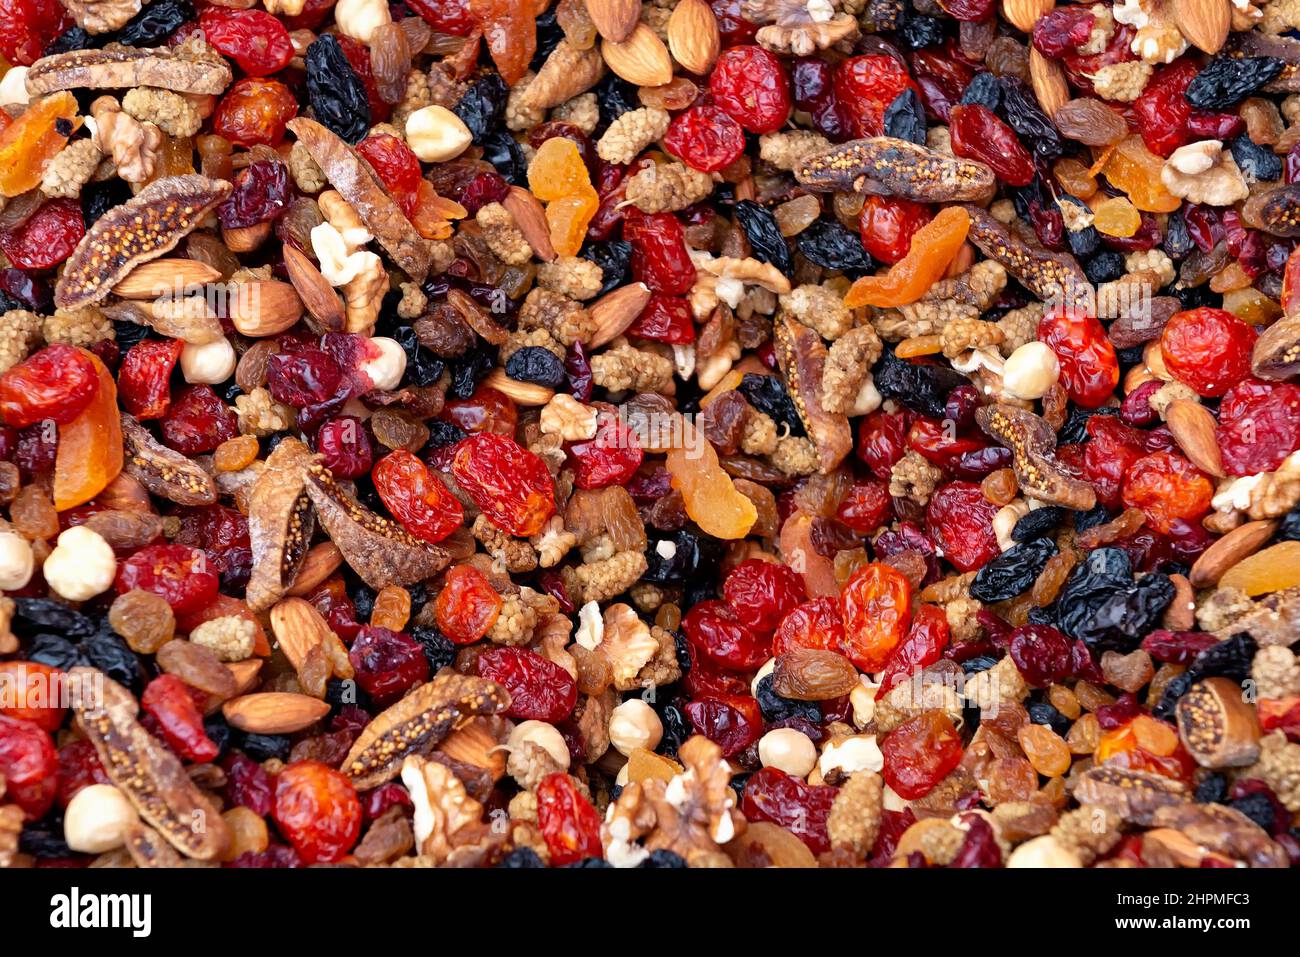 Mix of dried fruits and nuts Stock Photo